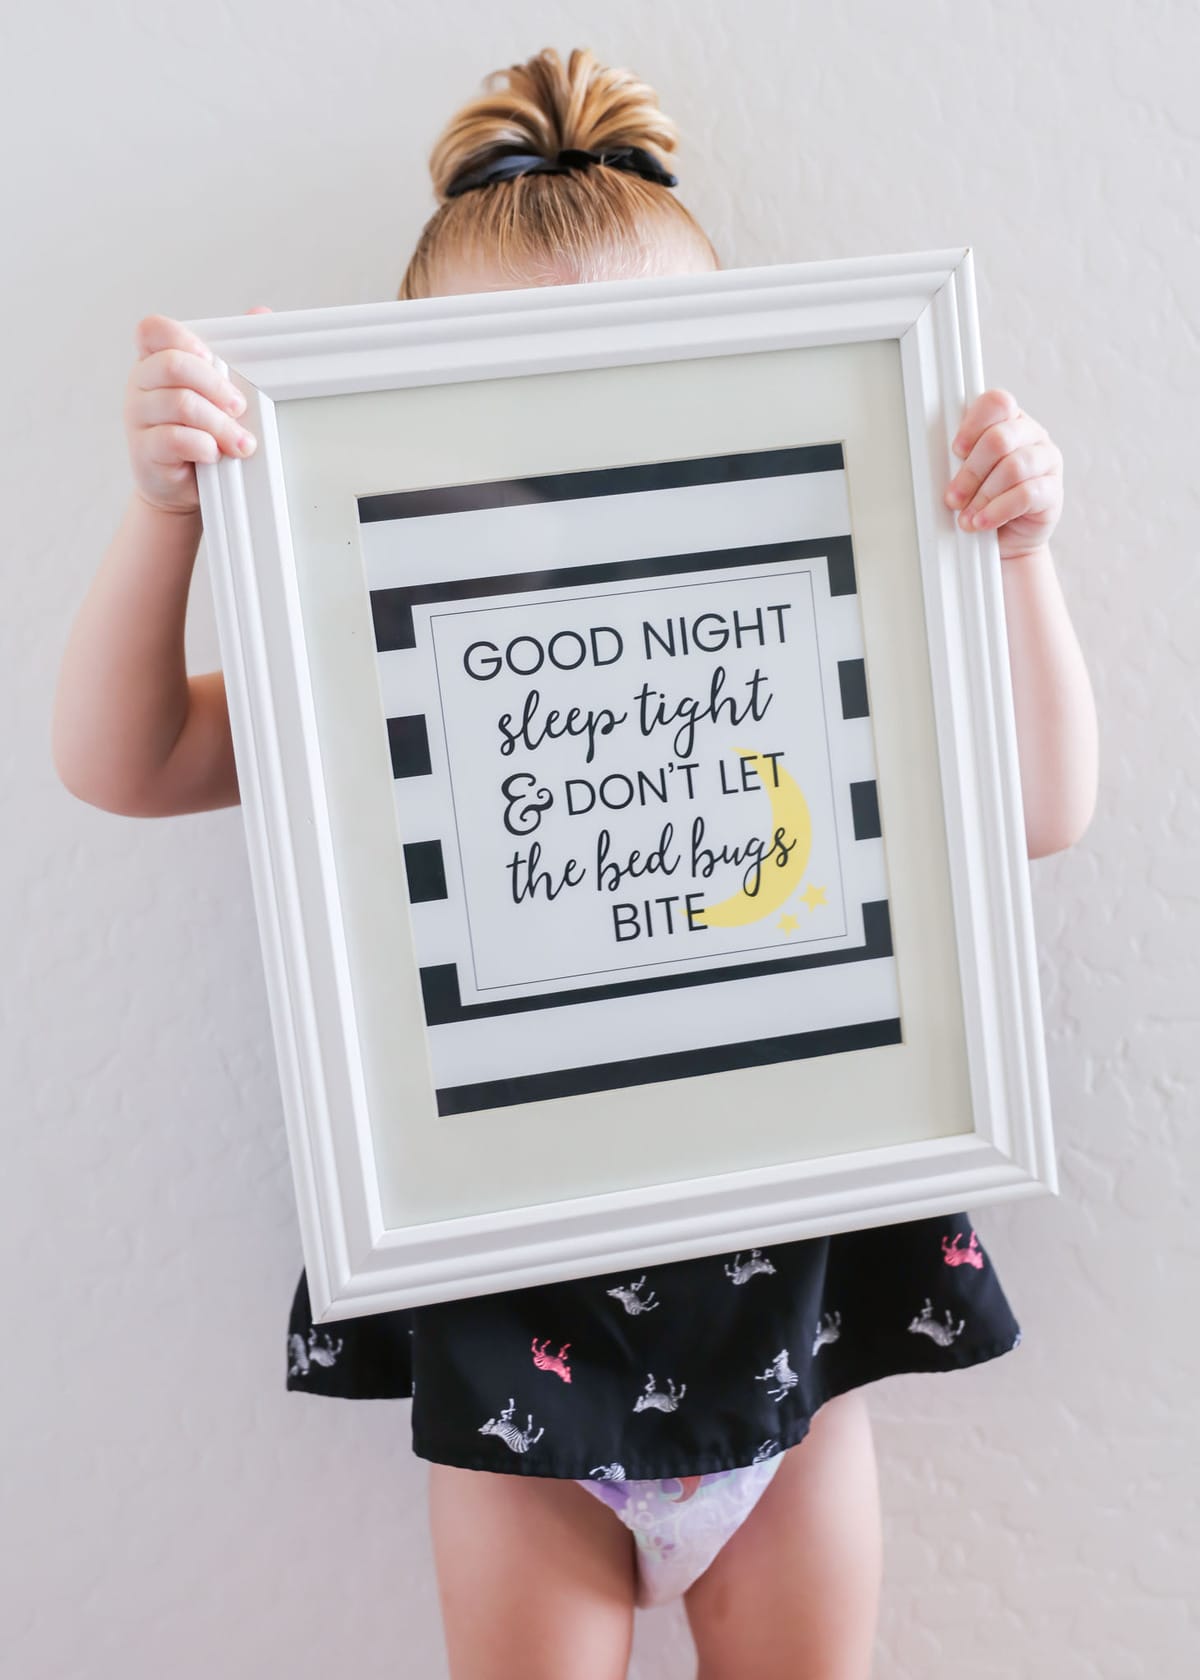 What I wish I had known about nighttime wetting - tips, tricks and how Sam's Club and Goodnites have had our family manage it. 